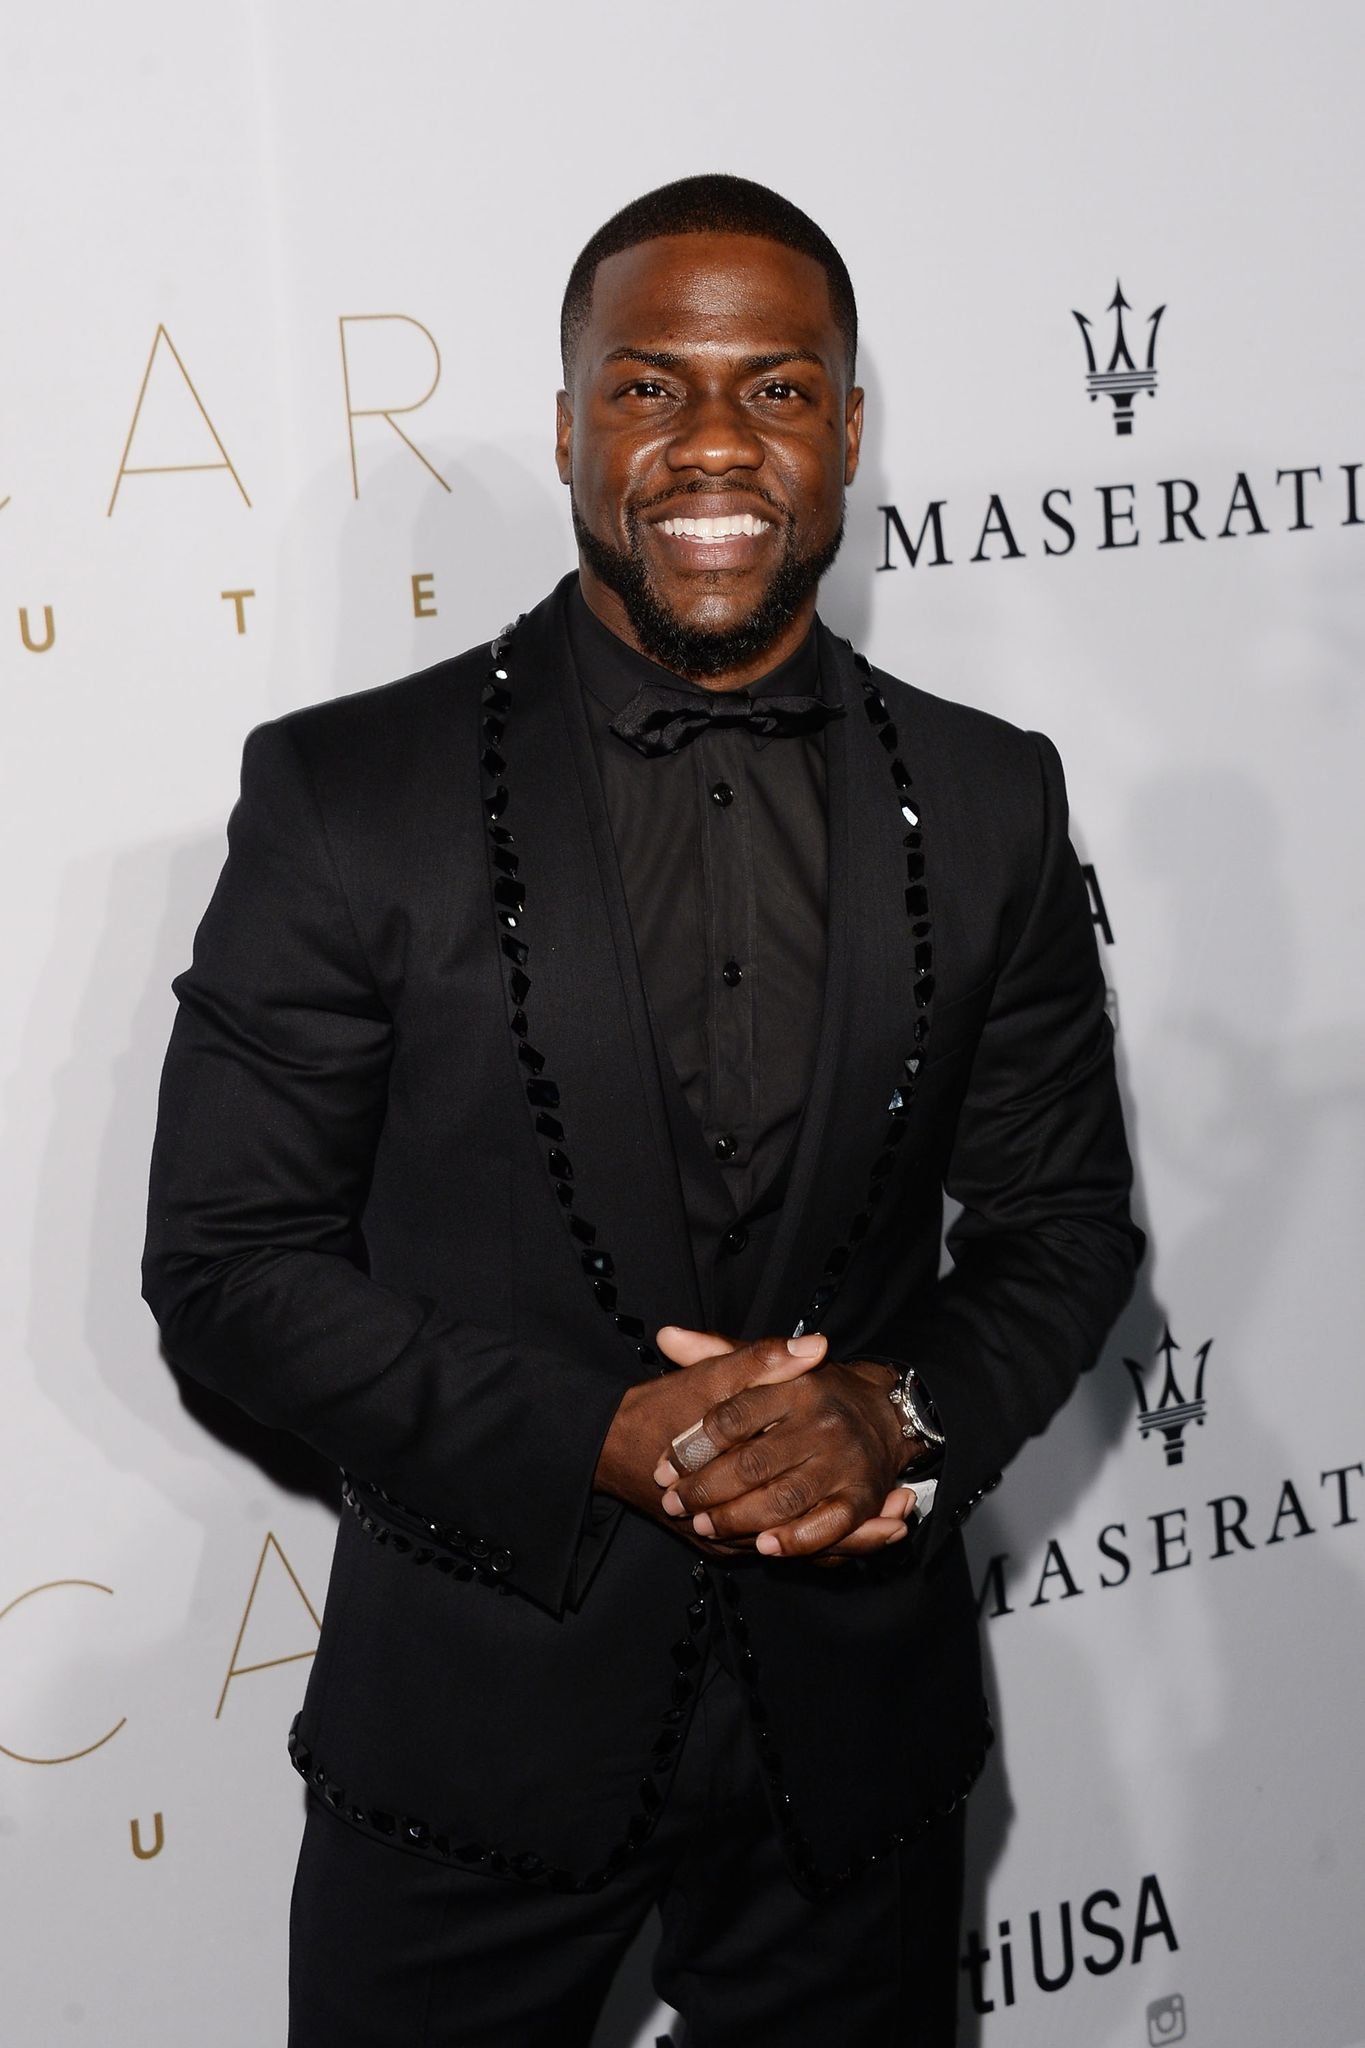 Kevin Hart at the Oscar Salute after party in Hollywood on February 28, 2016. | Photo: Getty Images